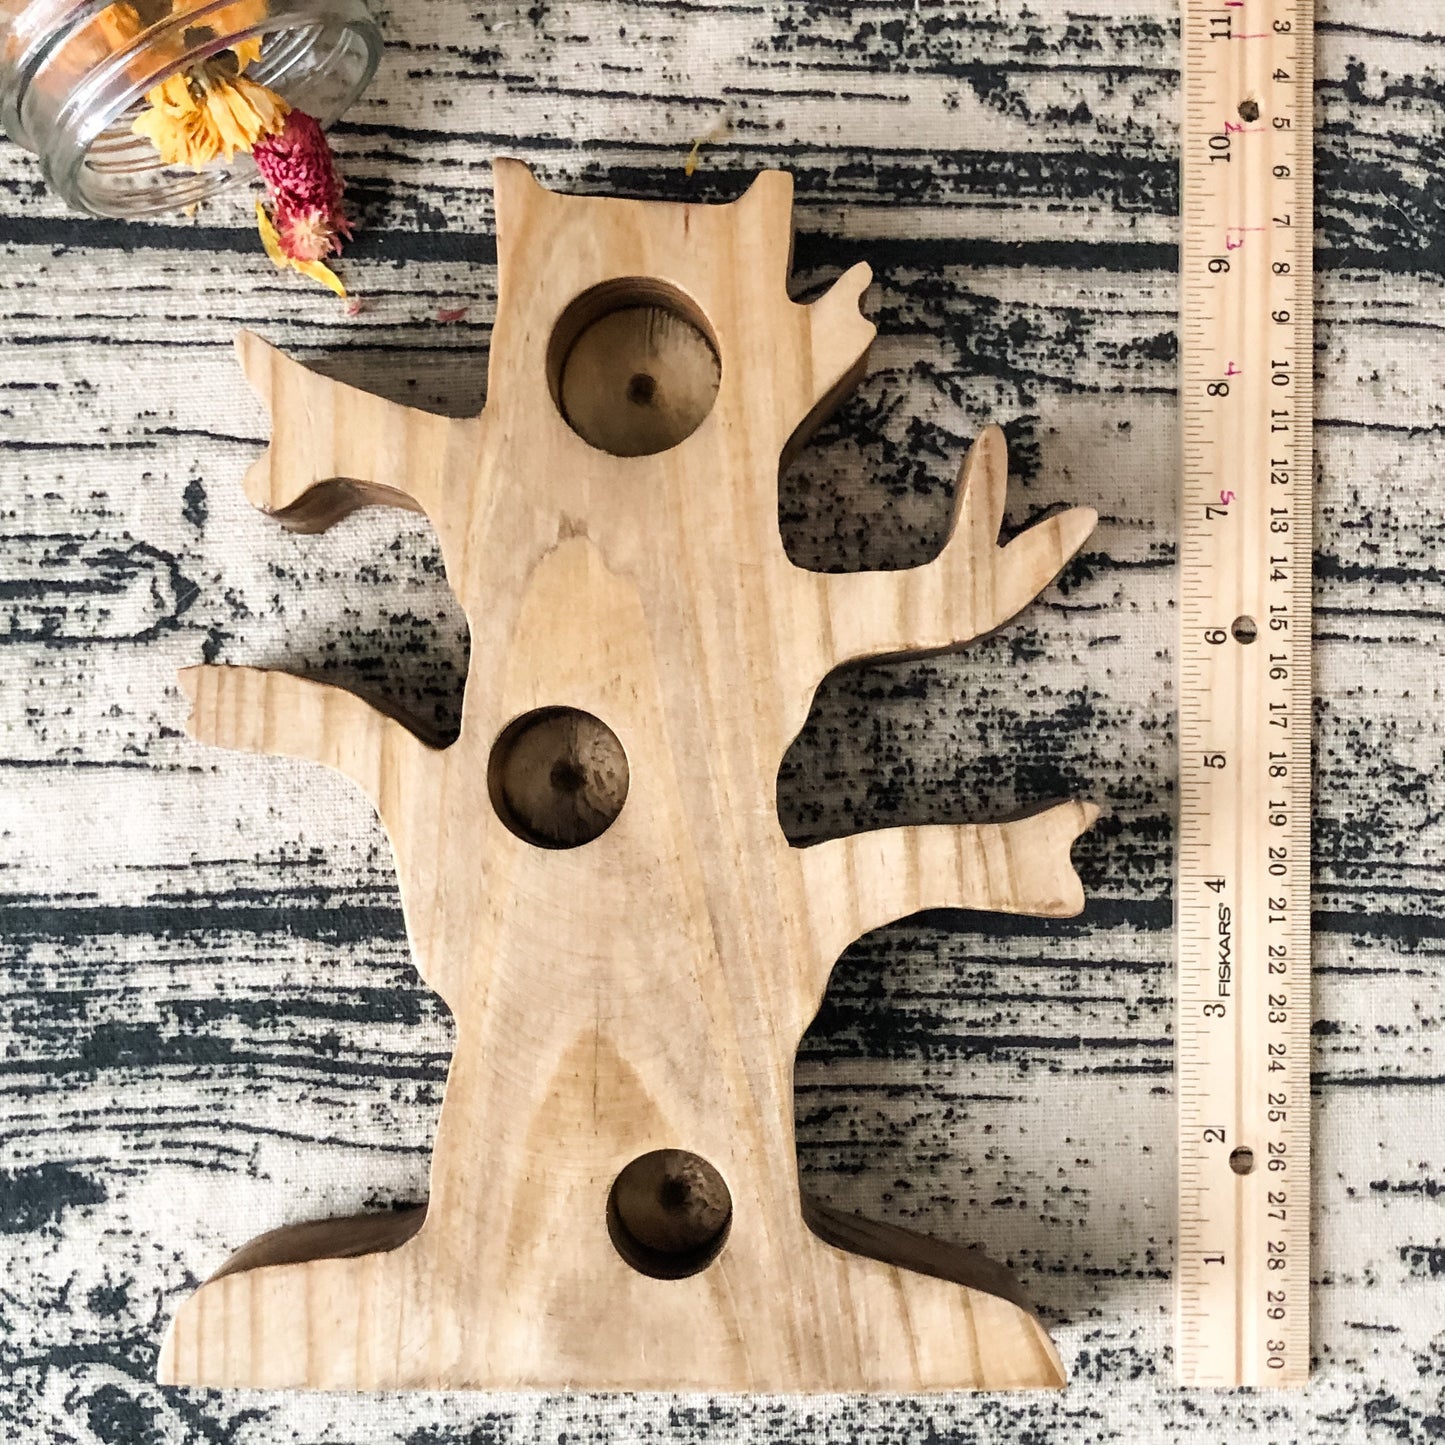 The Big Play Tree - Chickadees Wooden Toys